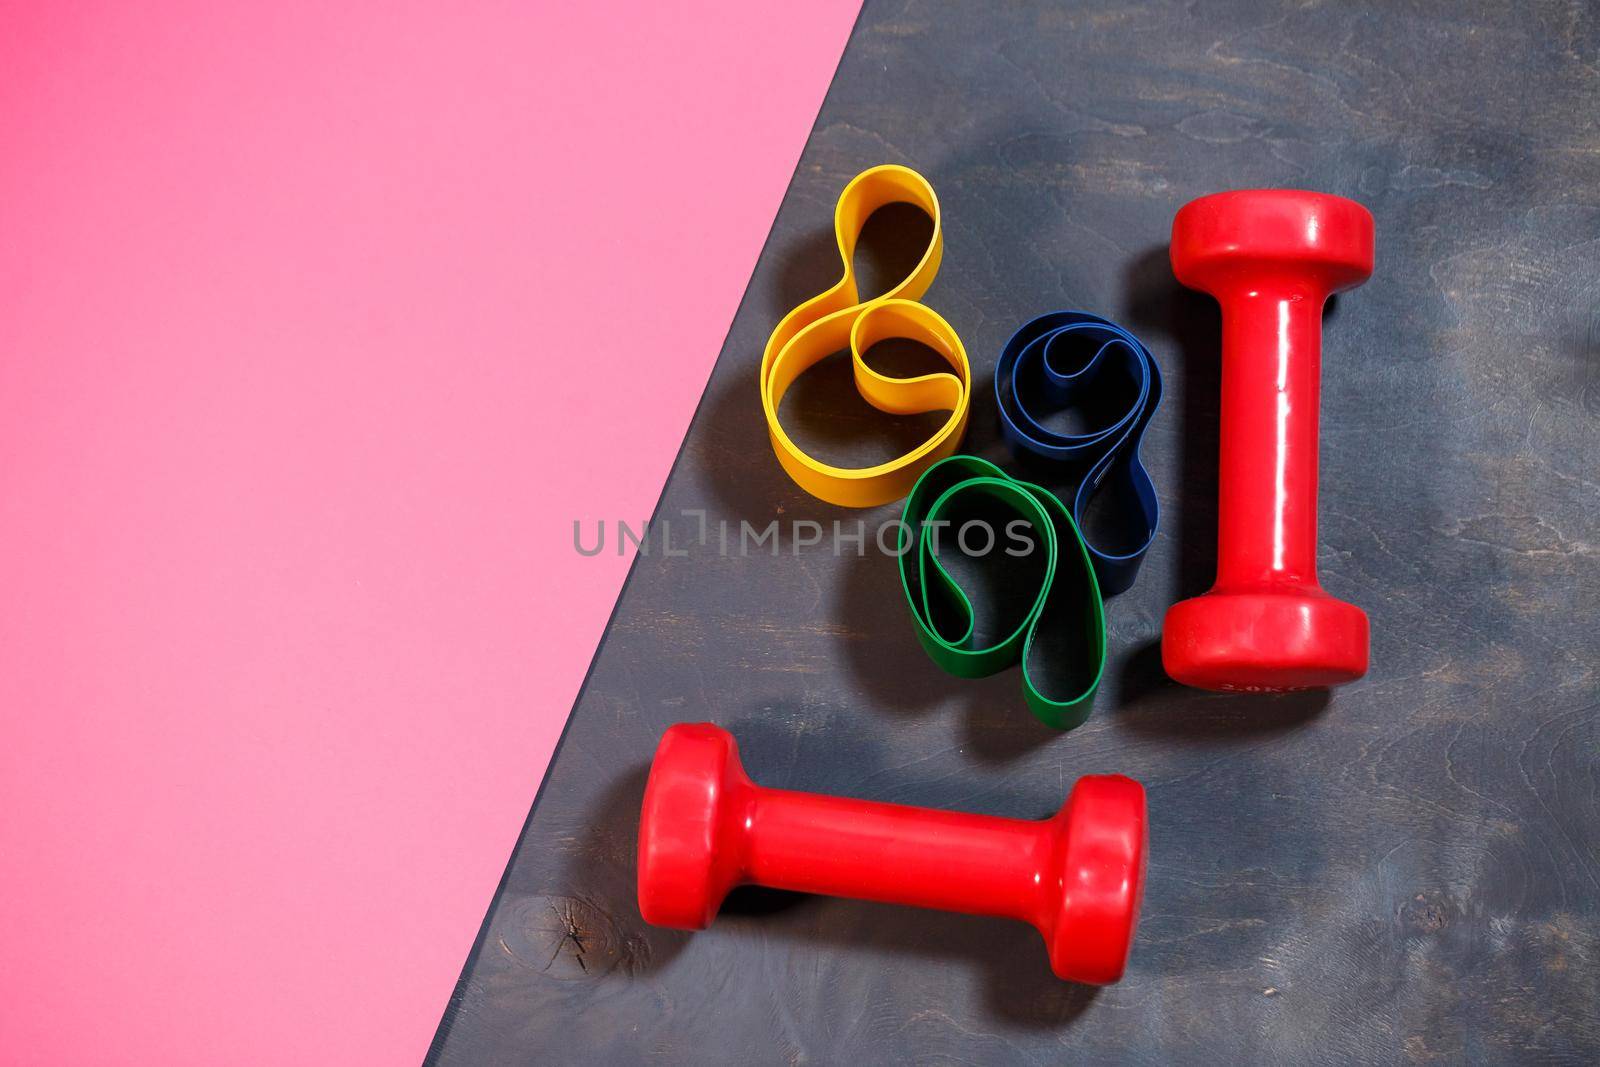 Red dumbbells and elastic bands for sports on a pink background. Healthy lifestyle. Fitness equipment for weight training. Muscle development and fitness training